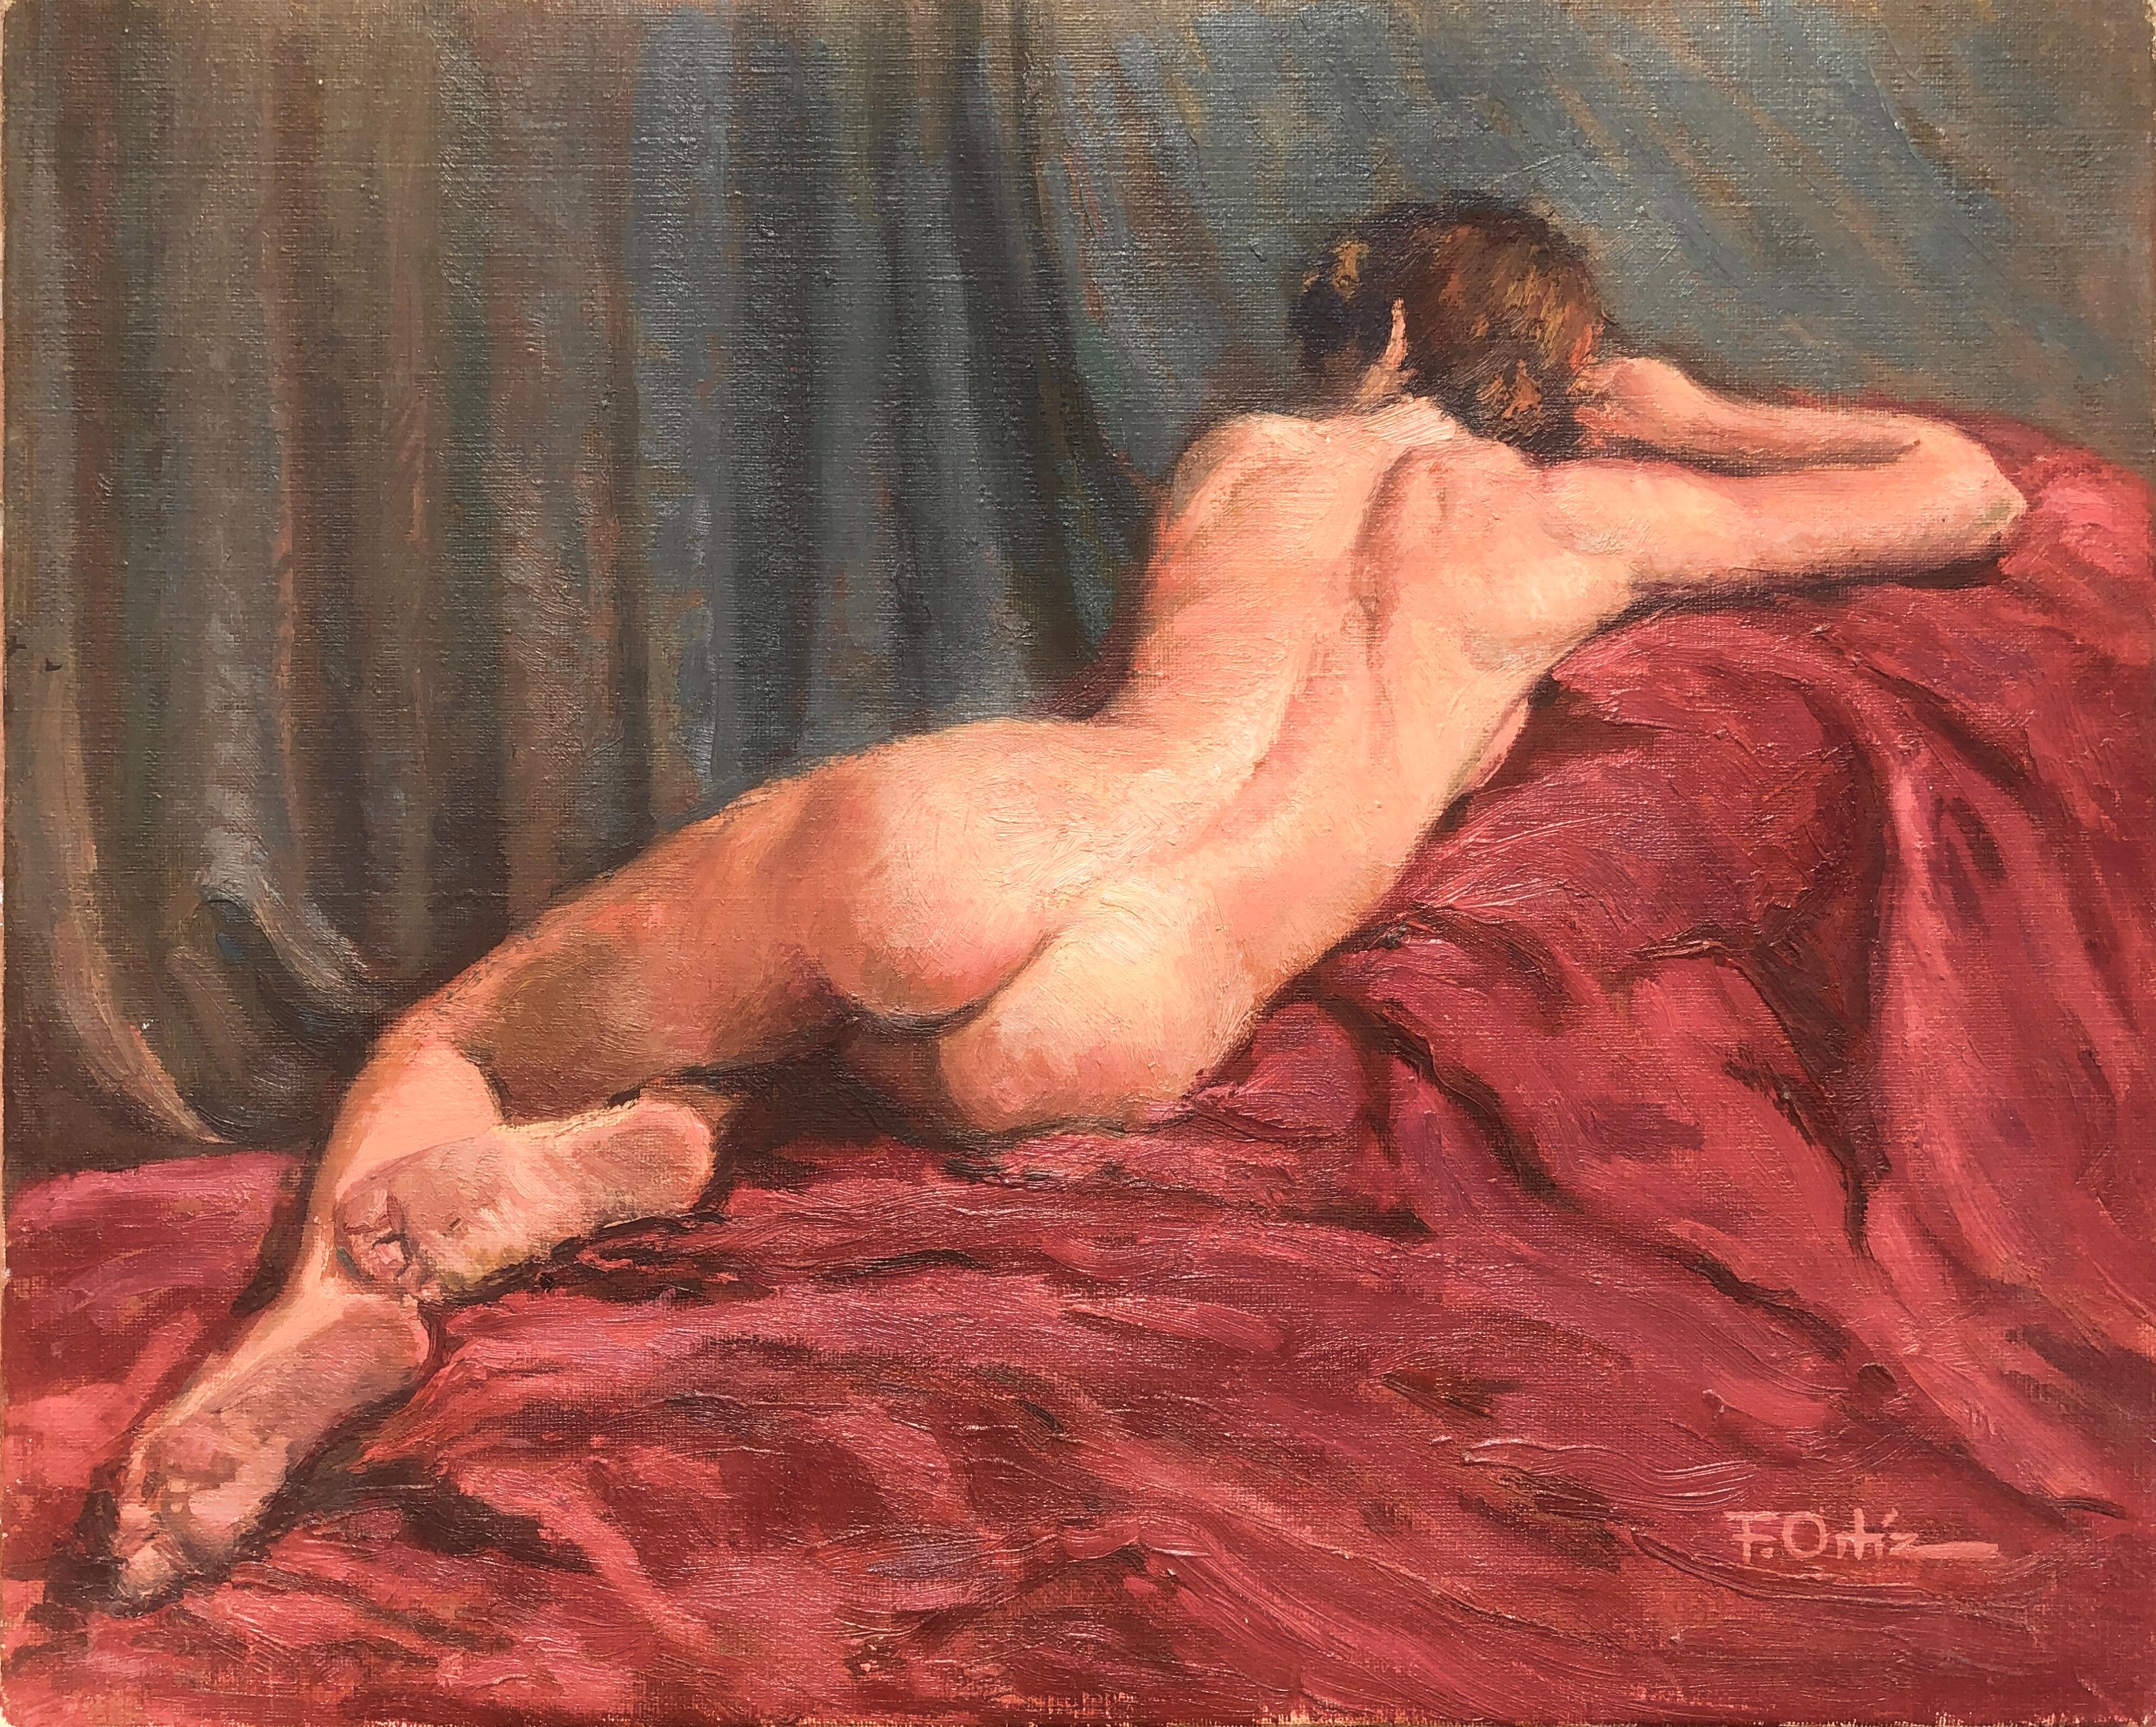 Francisco Ortiz Nude Painting - female nude woman oil on canvas painting